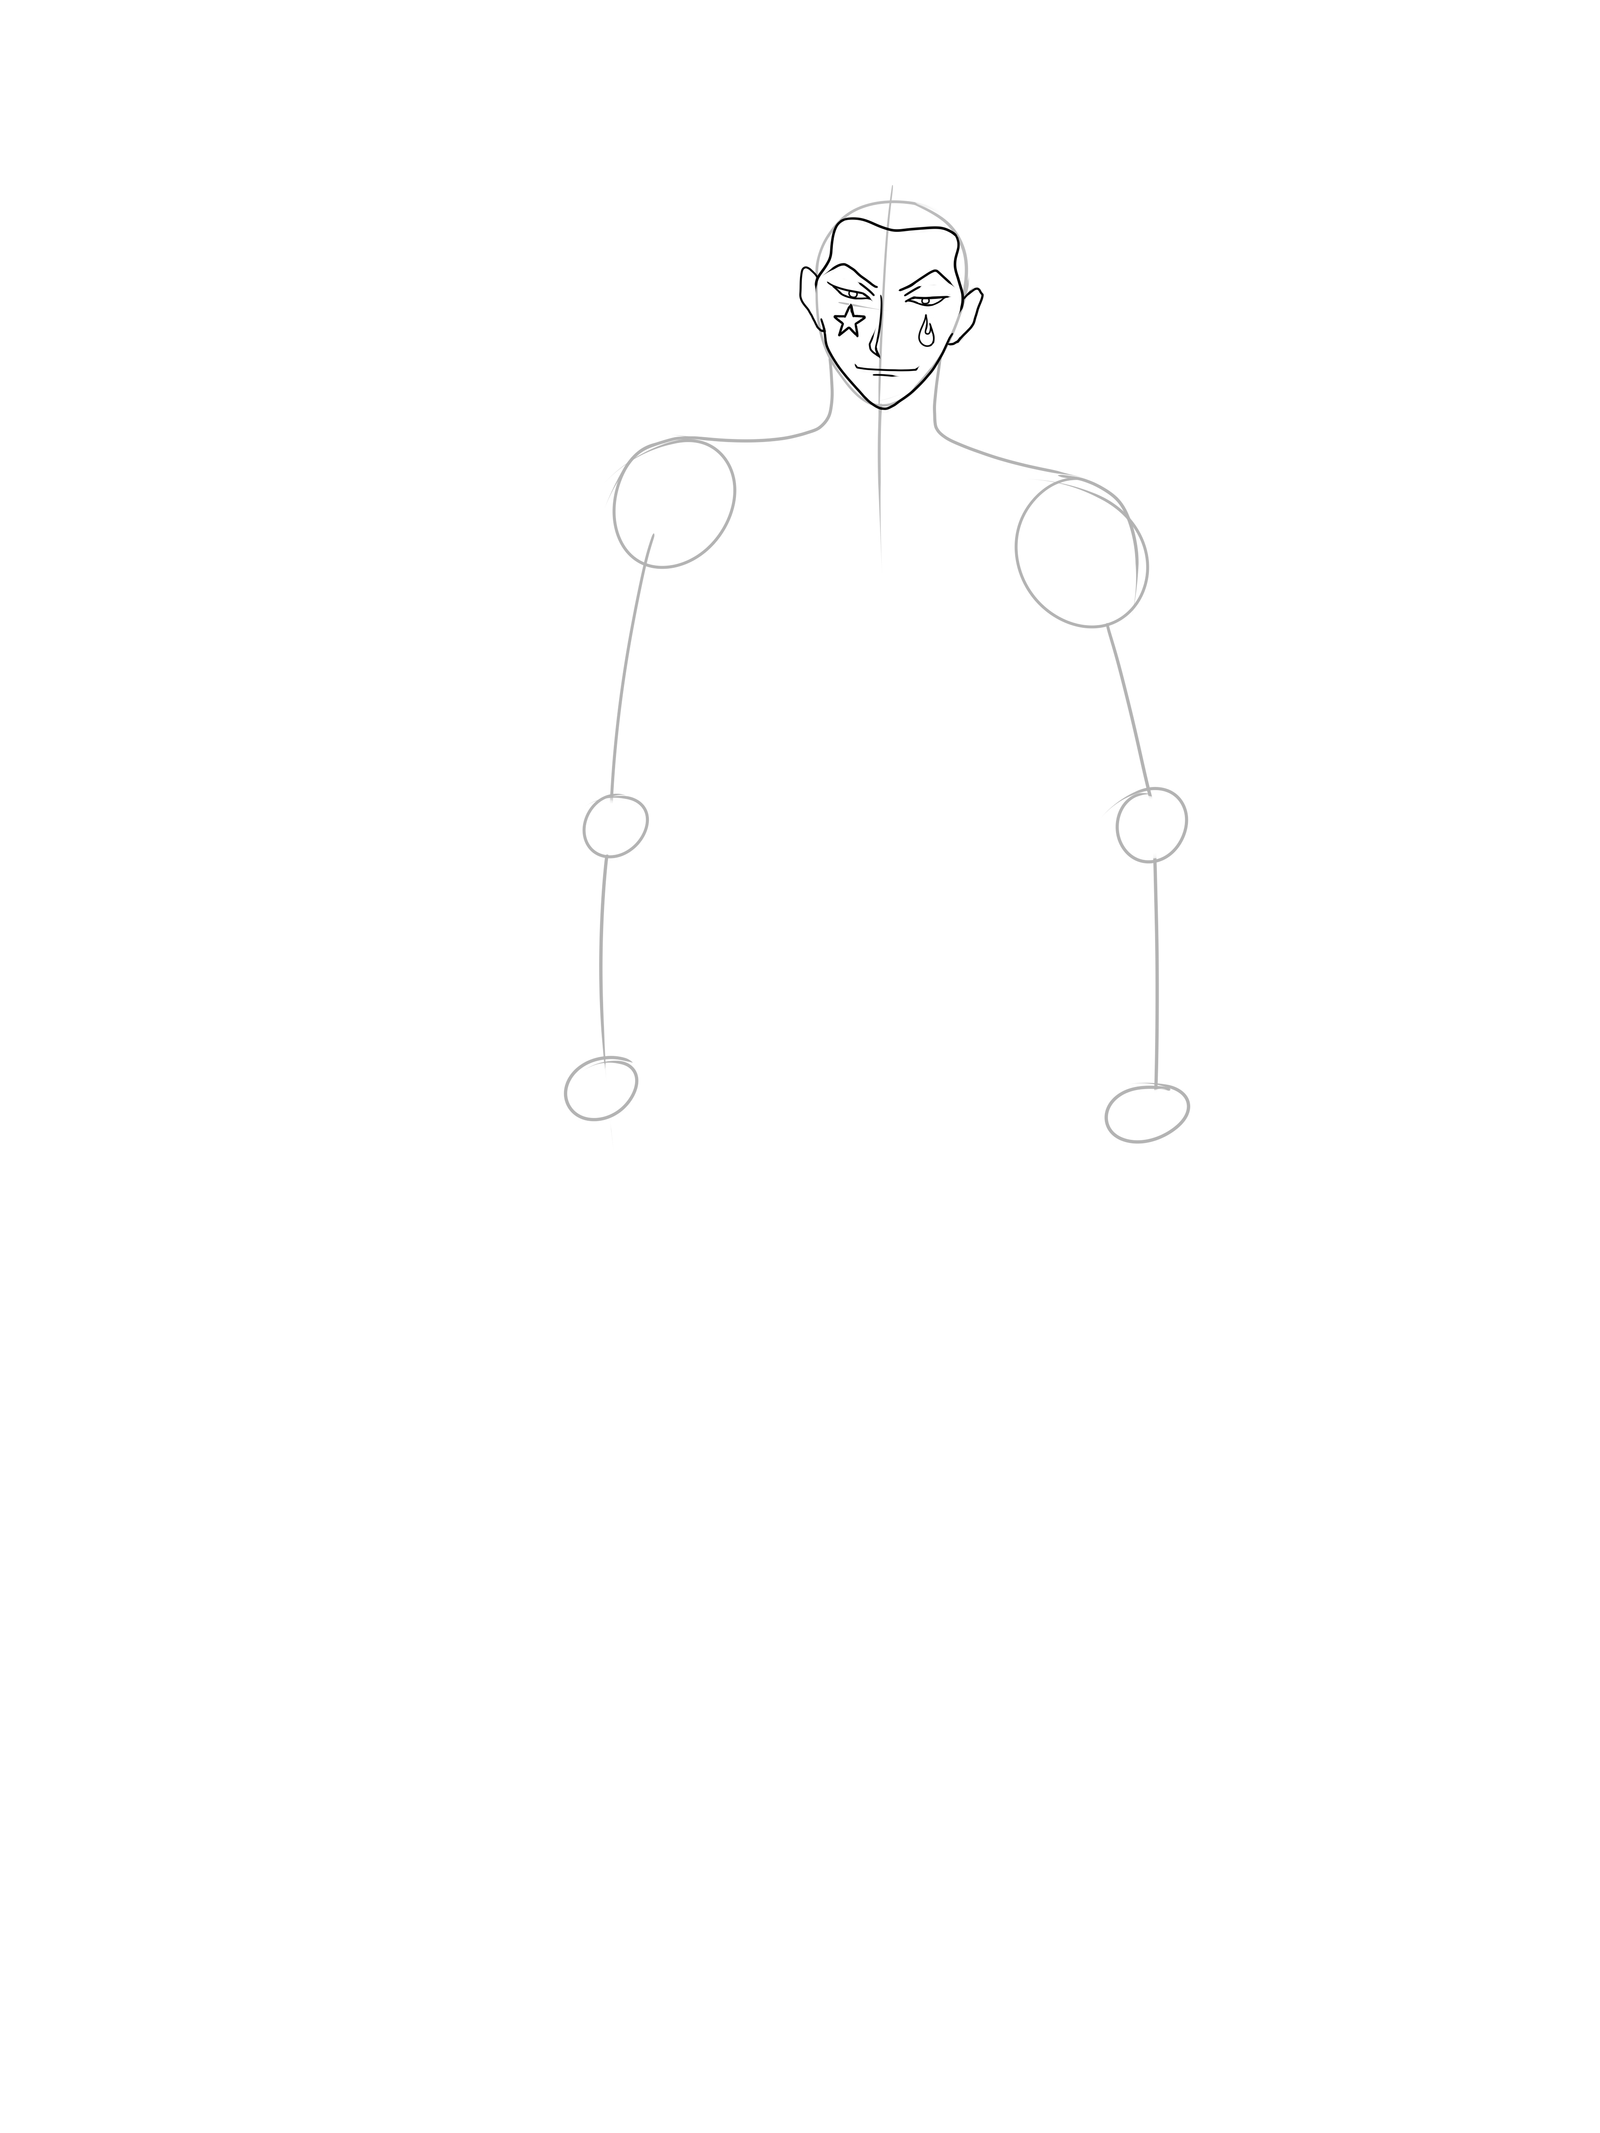 STEP 5) Draw Hisoka's Eyes, Nose, Mouth, and Tattoos